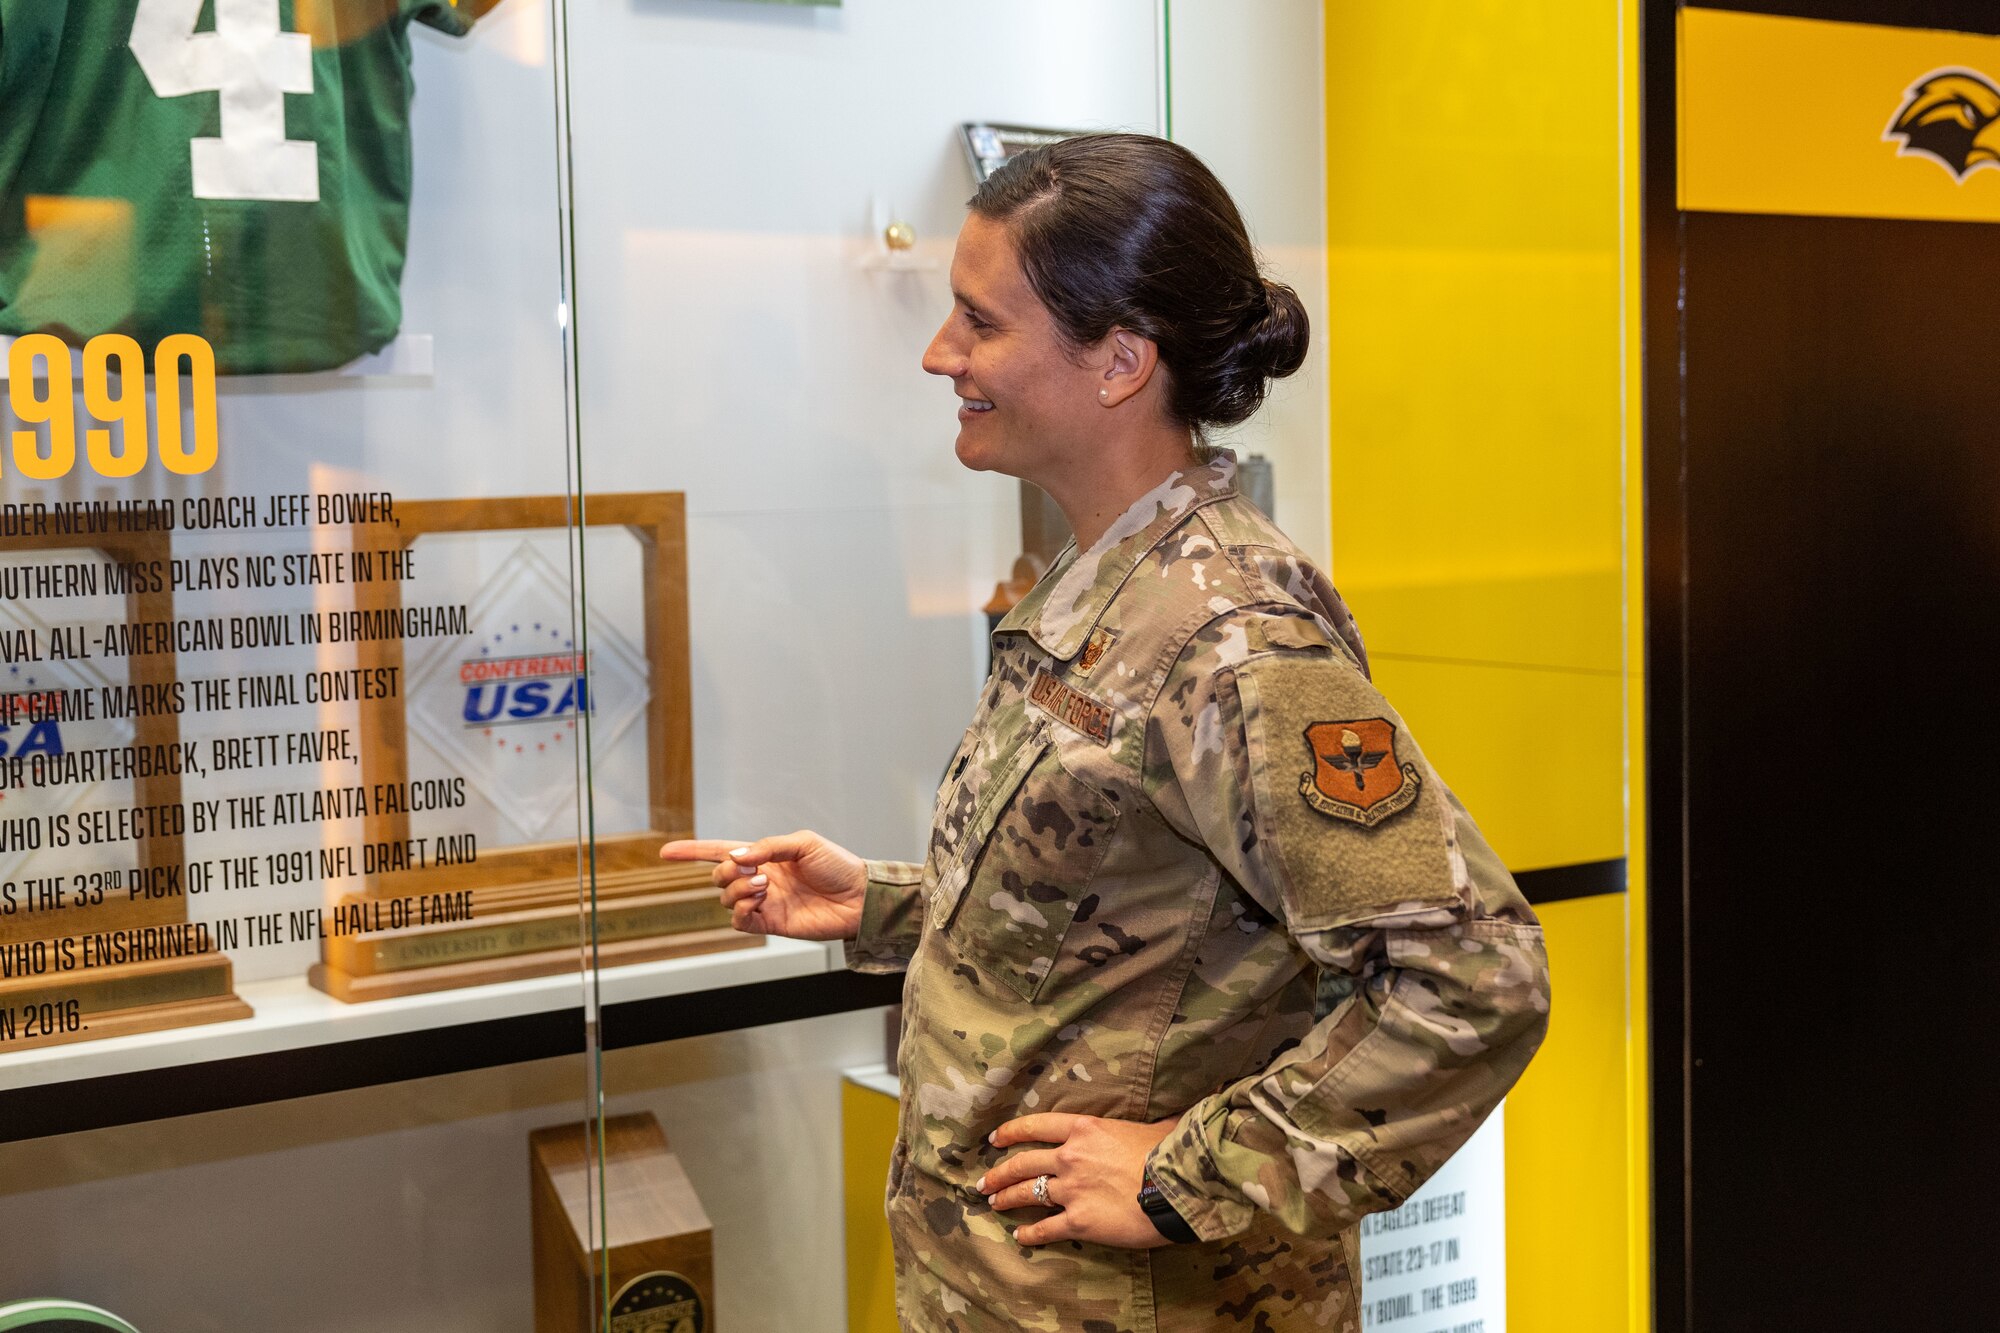 U.S. Air Force Lt. Col. Katherine Kuc, 81st Force Support Squadron commander, looks at a display of a football player and University of Southern Mississippi alumni in Hattiesburg, Mississippi, March 1, 2024.